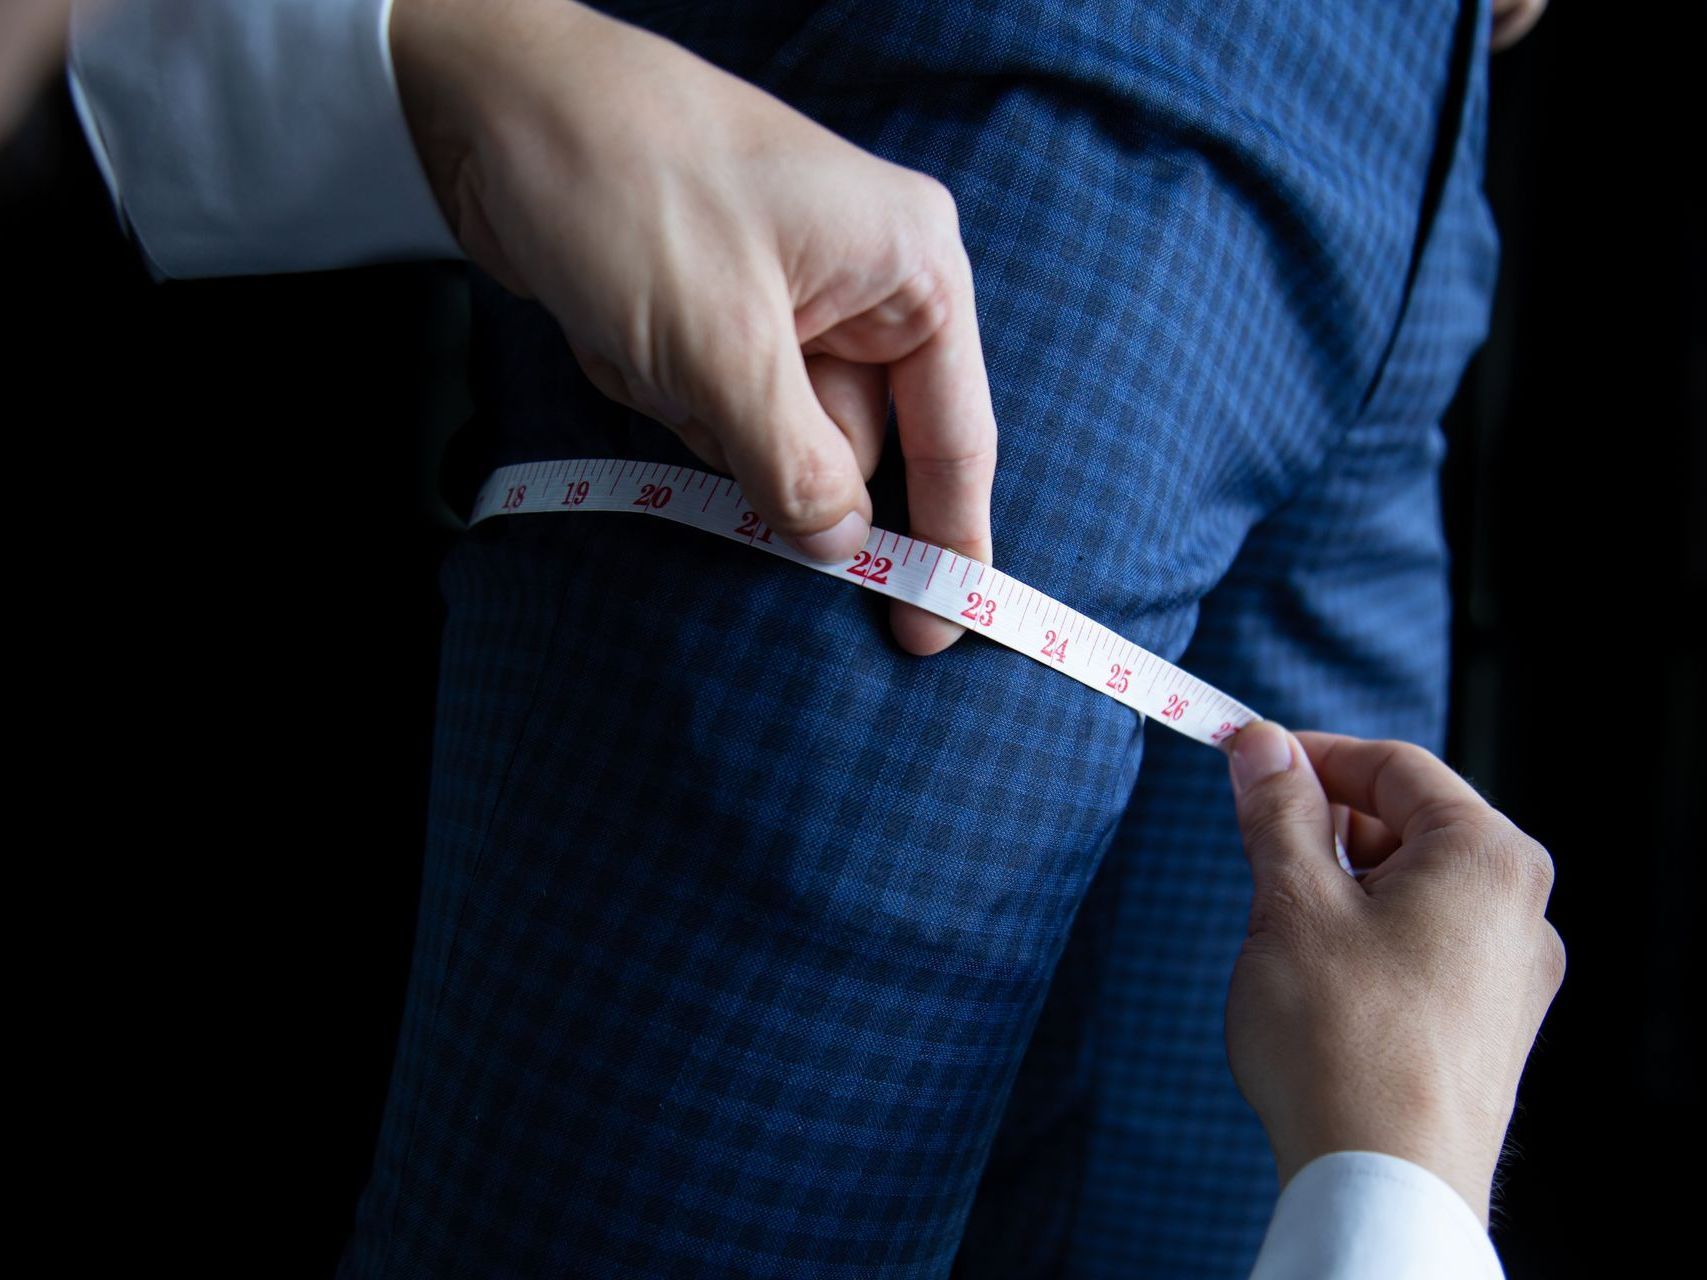 A person is measuring a person 's pants with a tape measure.